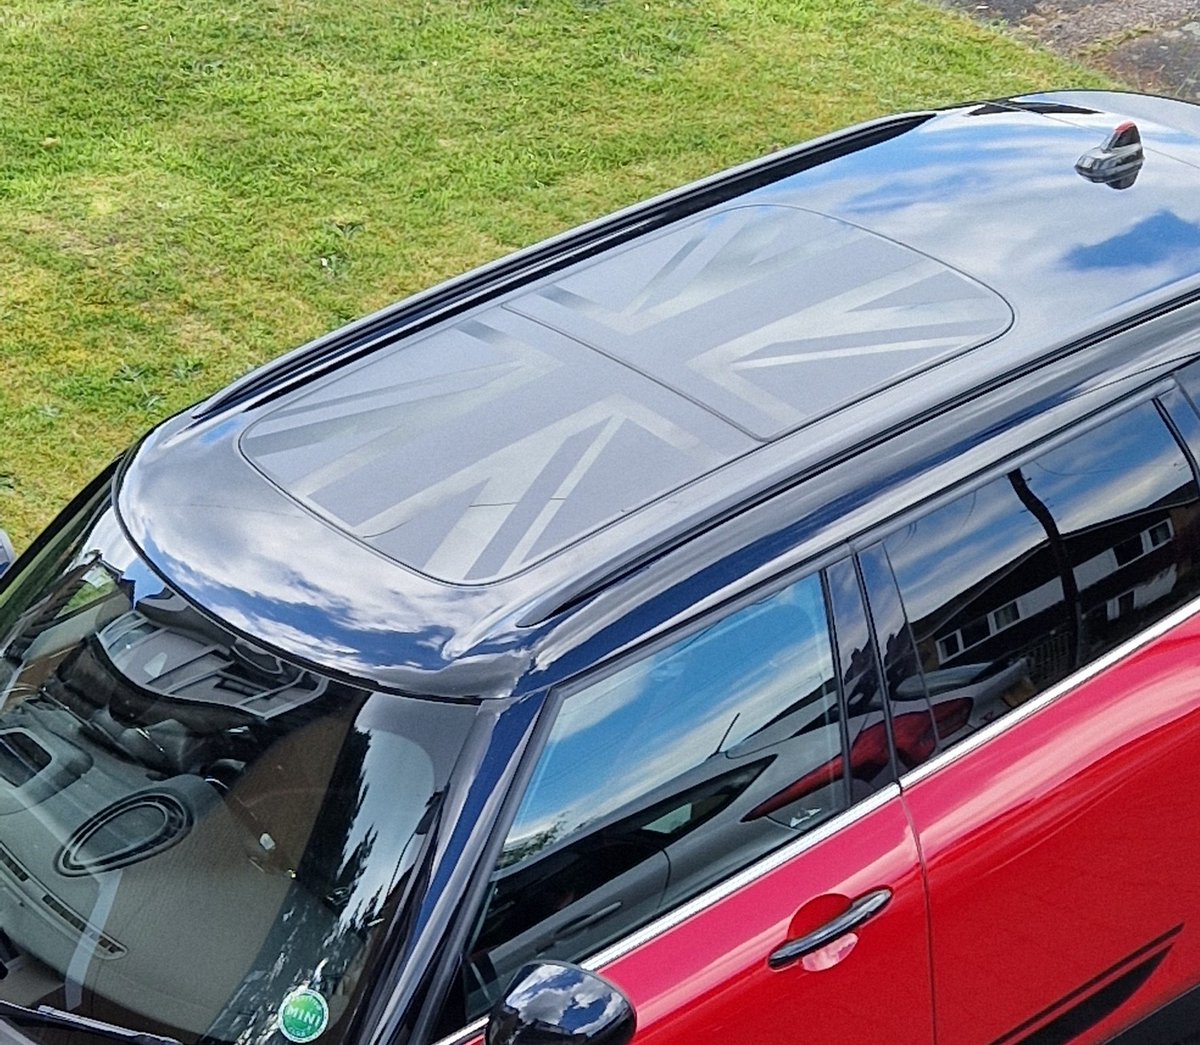 Roof decal for Ruby Clubman thanks to my lovely hubby @MINIUK @britishminiclub #F54 #MiniClubman #CooperSSport #ChilliRed